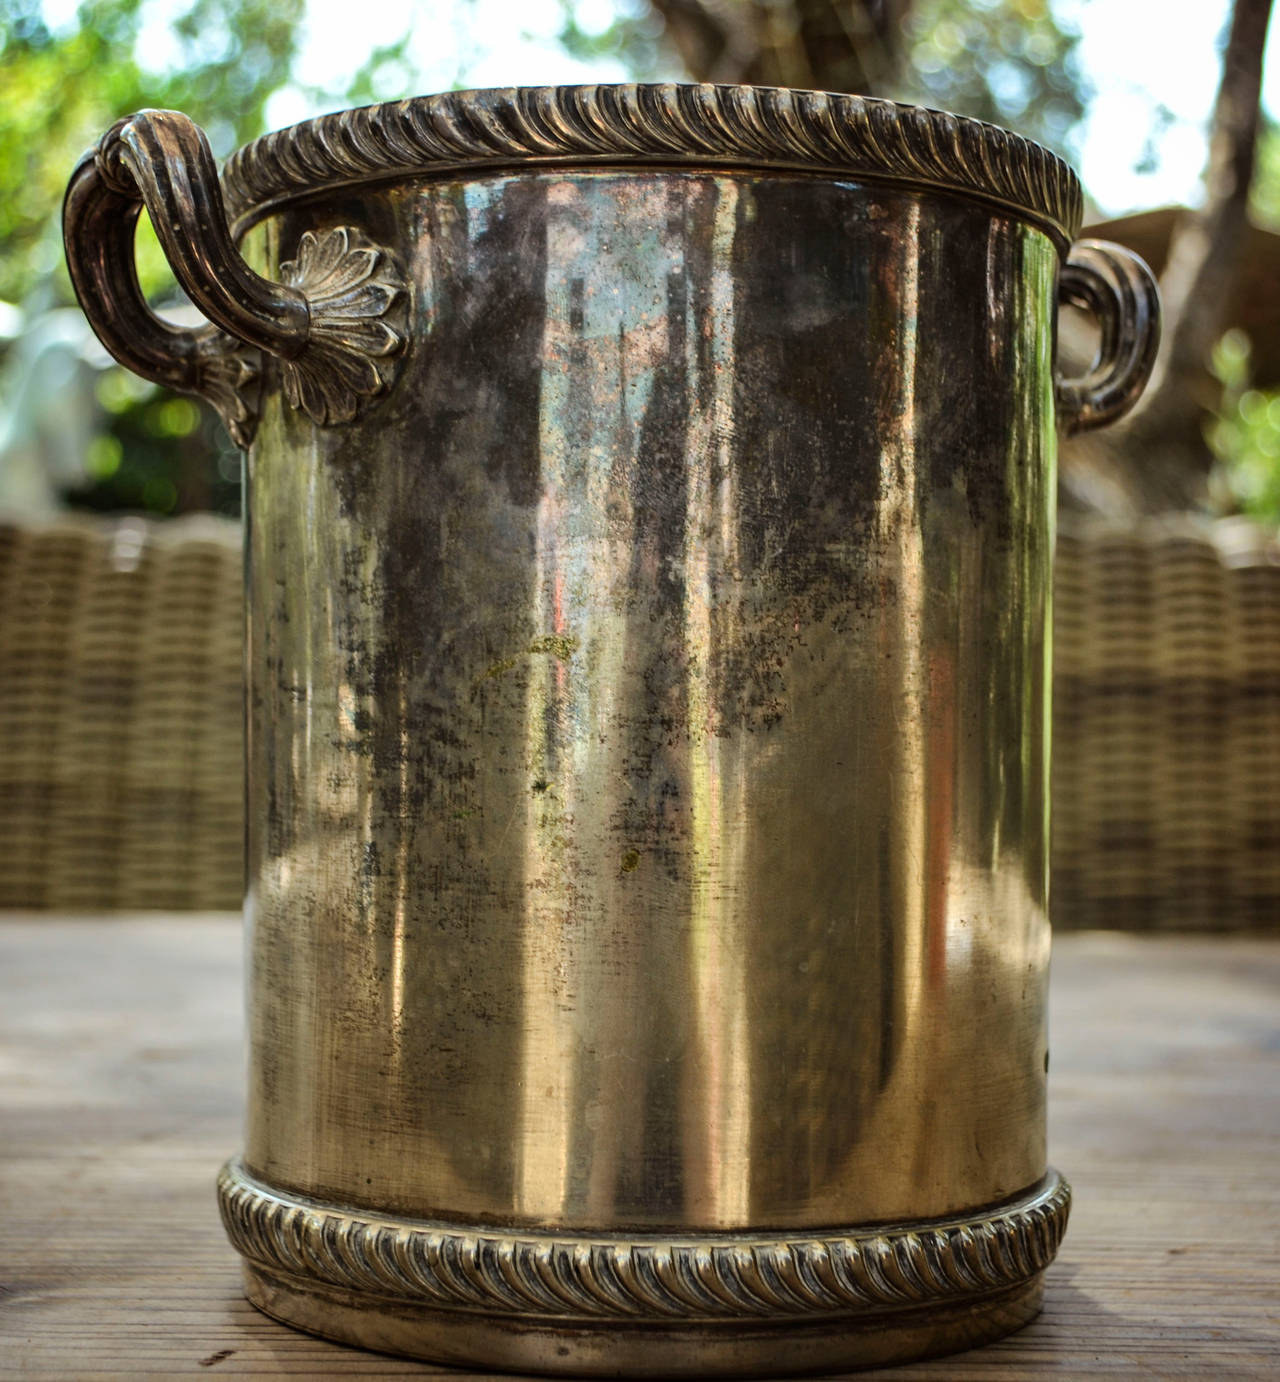 Vintage c.1930 champagne bucket from France with patina. Approx 1930. Wear consistent with wear and age.